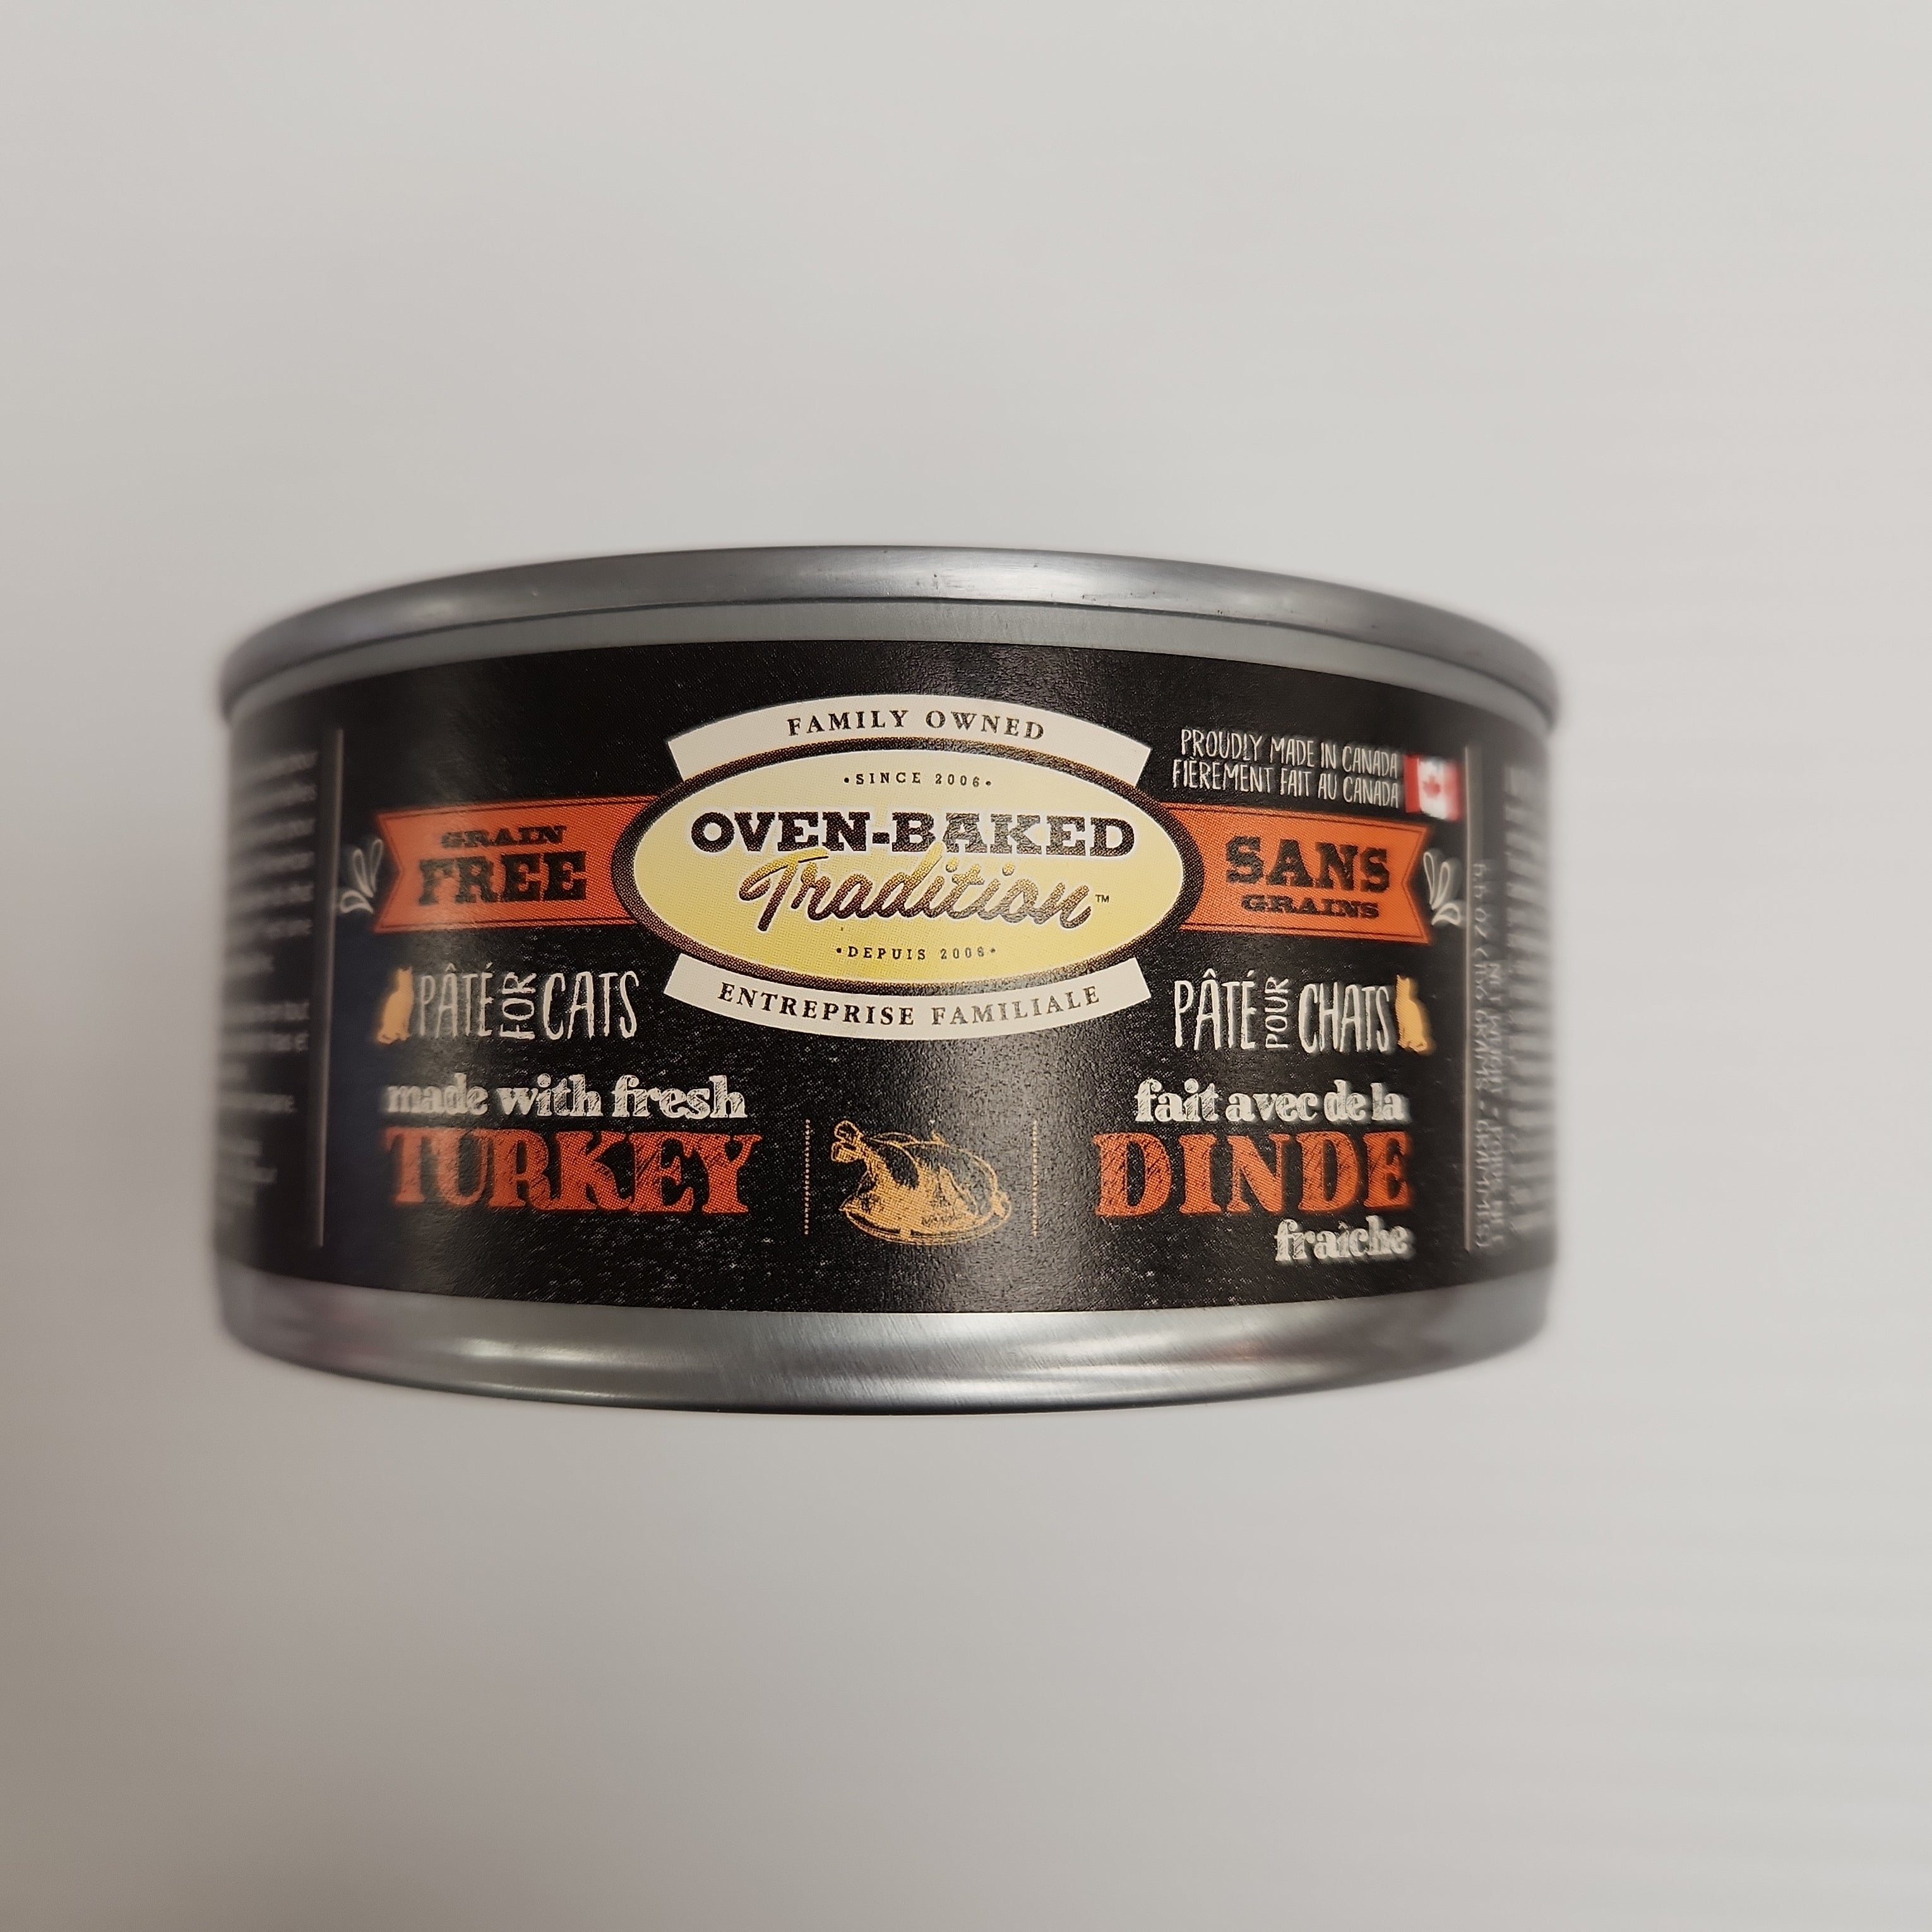 Oven-Baked Turkey Recipe Canned Cat Food 5.5oz